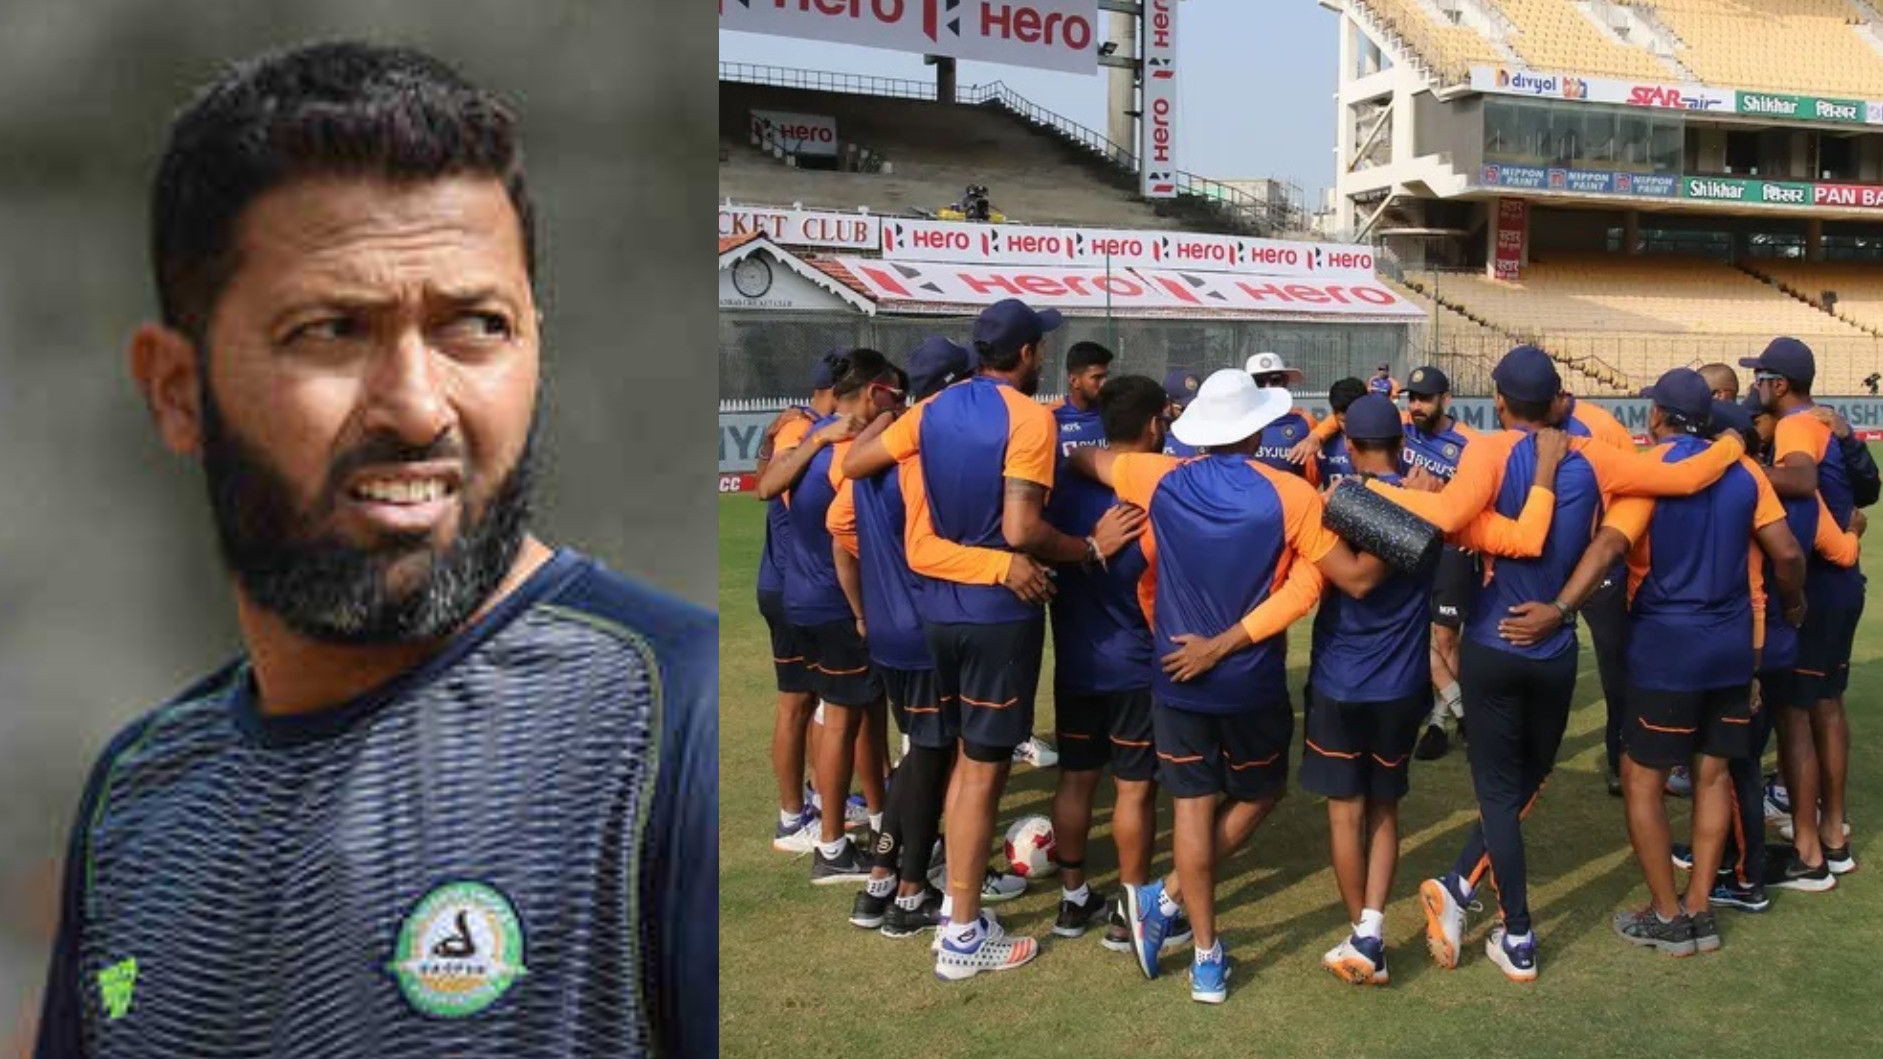 IND v ENG 2021: “Don’t lose heart Indian fans,” Wasim Jaffer brings up history to give fans hopes after loss in 1st Test